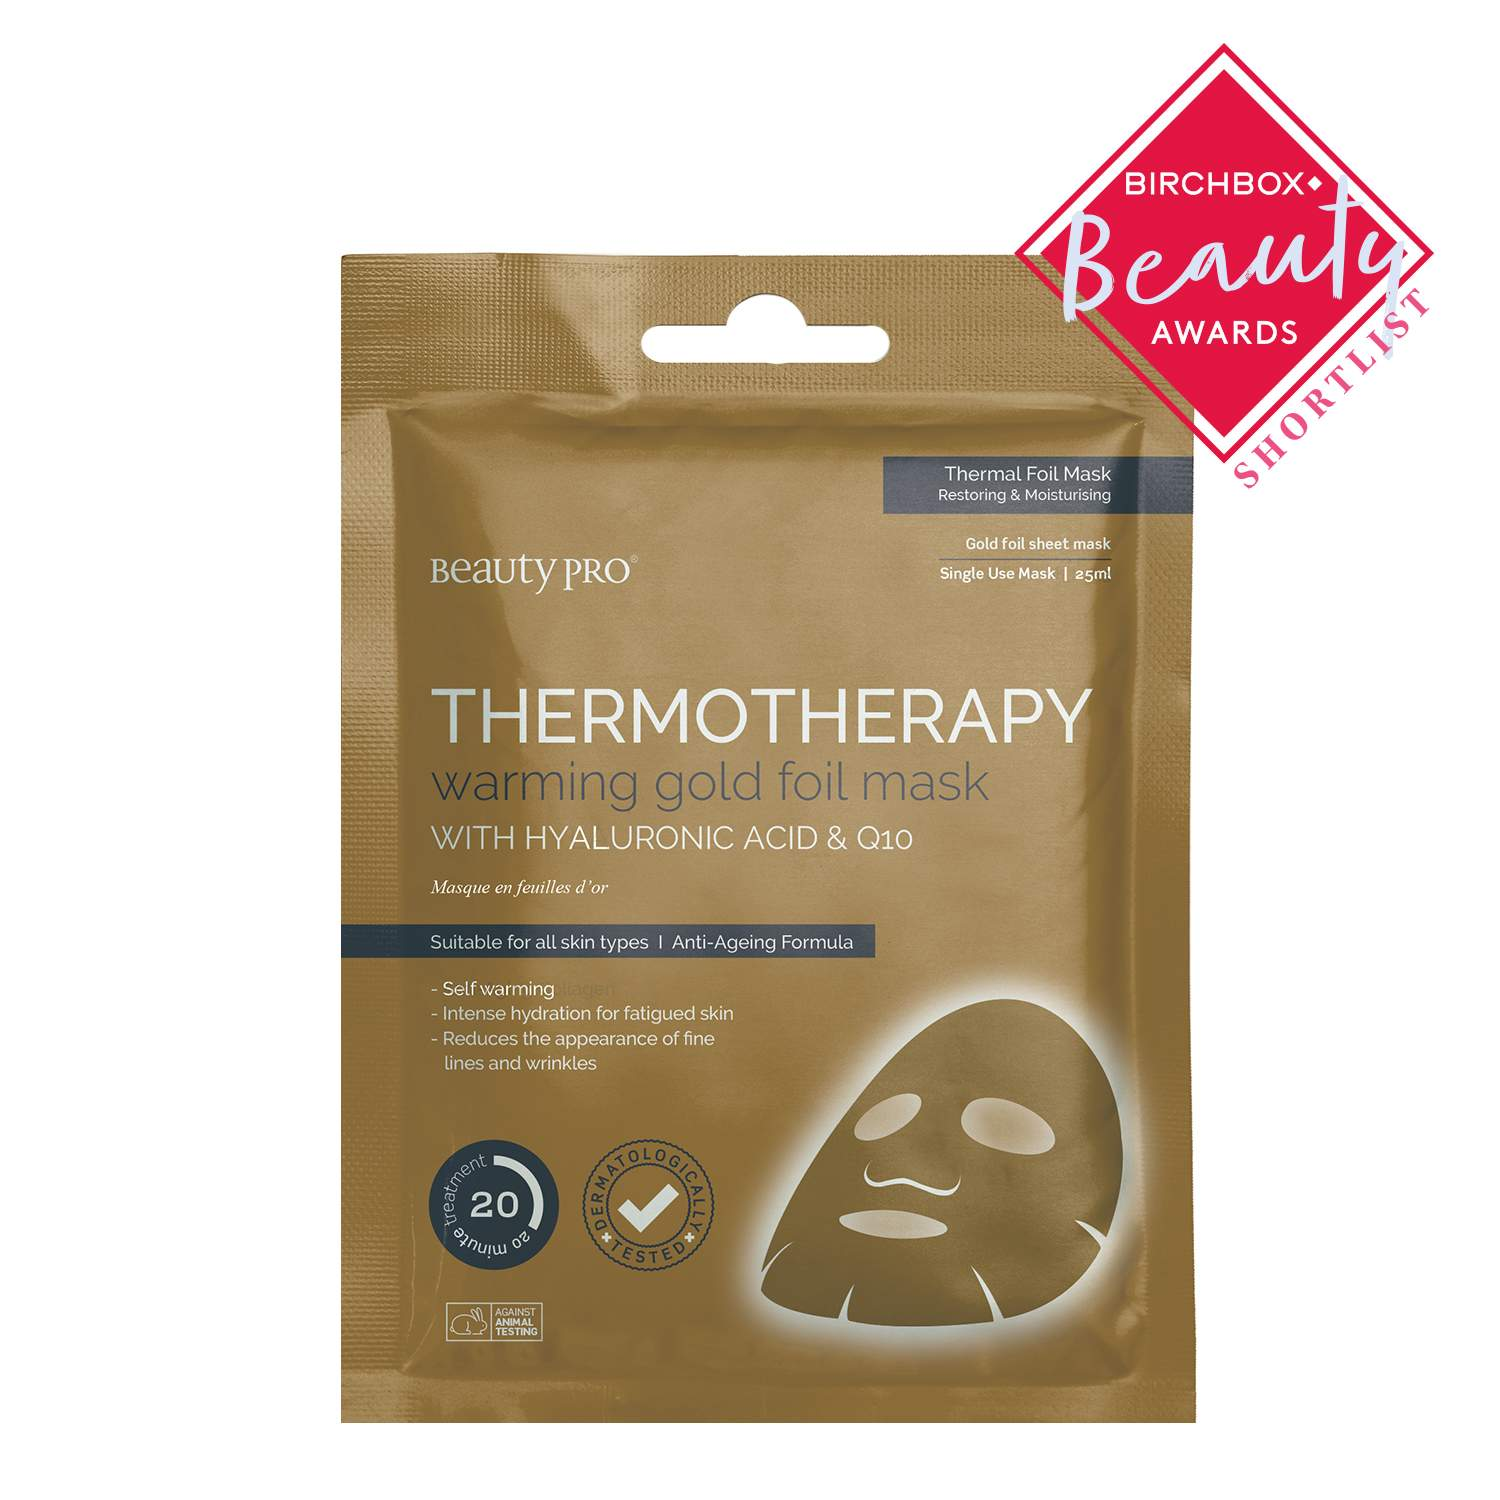 BeautyPro THERMOTHERAPY Warming Gold Foil Mask with Hyaluronic Acid & Q10  1